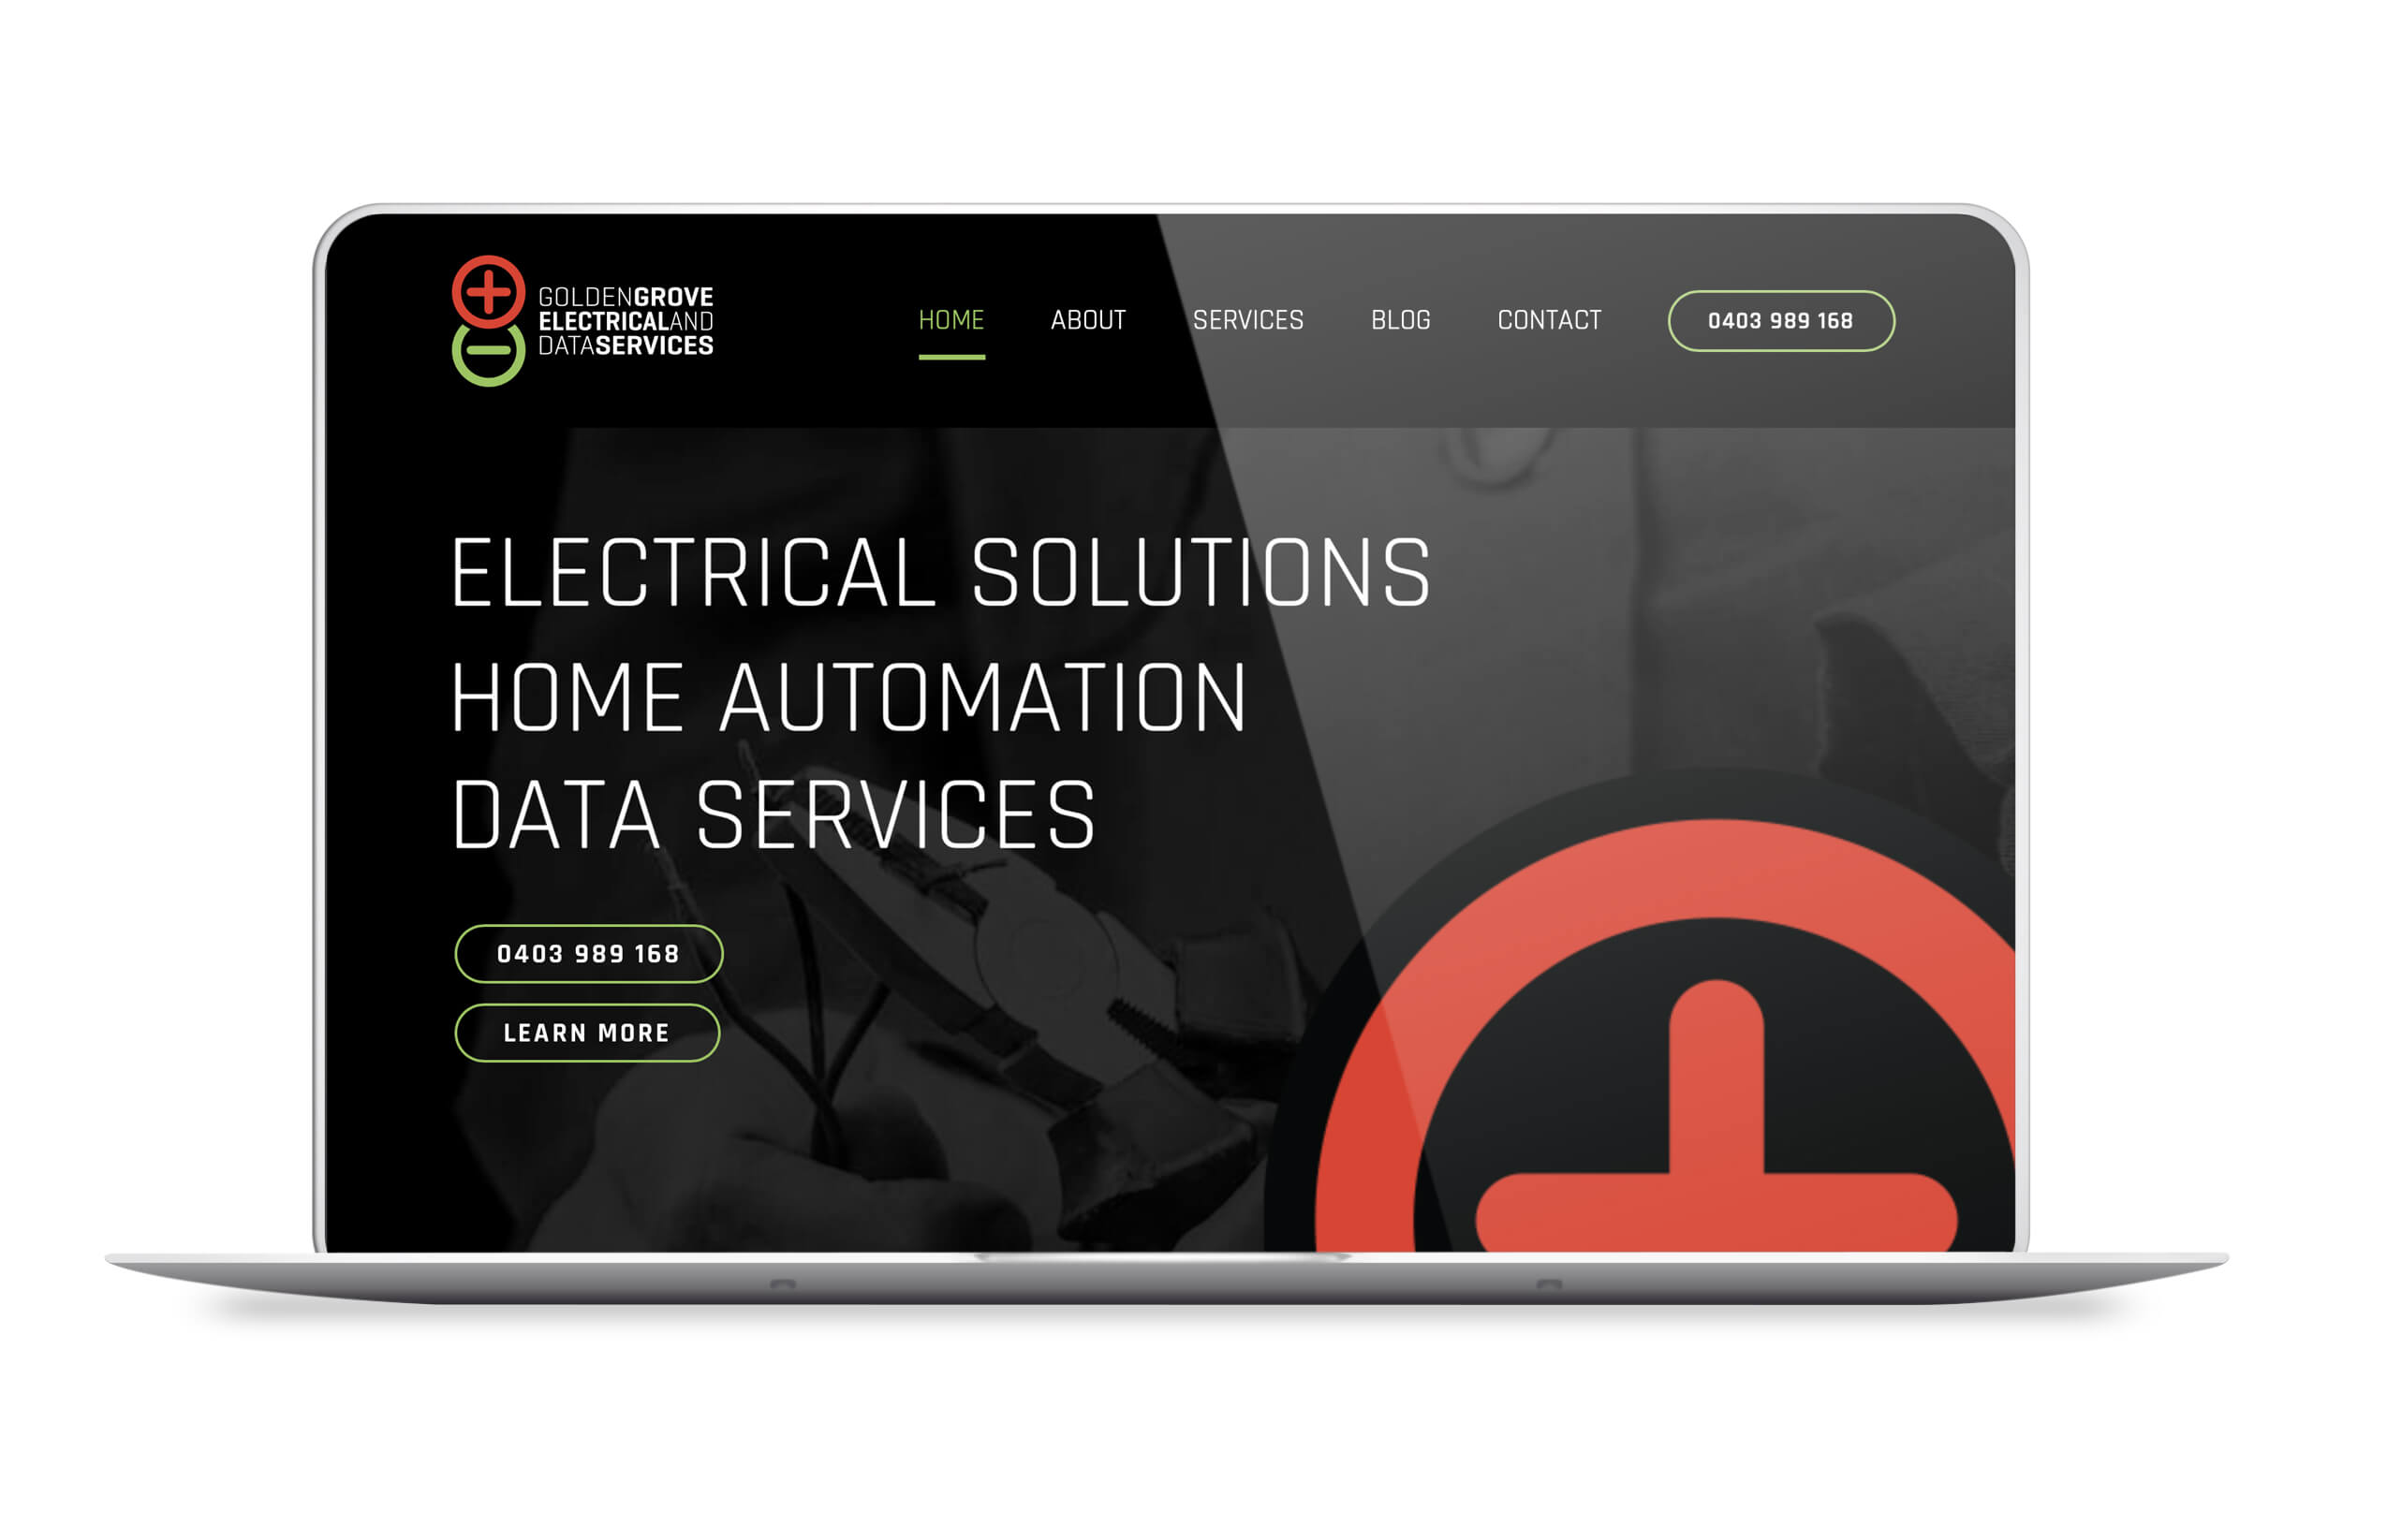 Icon Web Design Adelaide. Image of the Golden Grove Electrical & Data Services homepage displayed on a laptop.